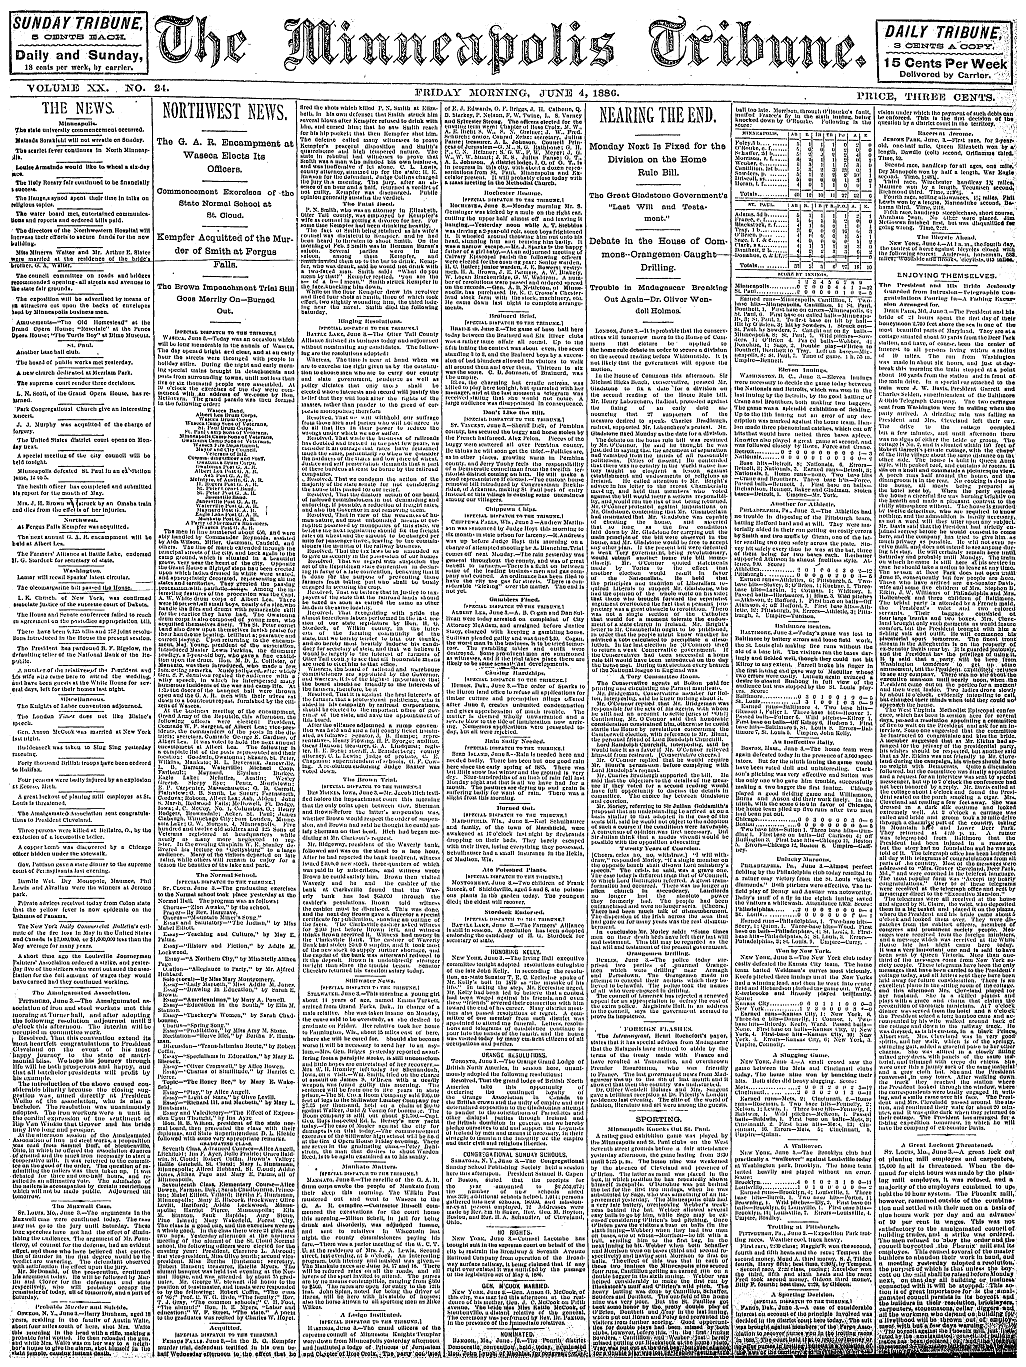 A Year in History: 1920 Timeline - Historic Newspapers